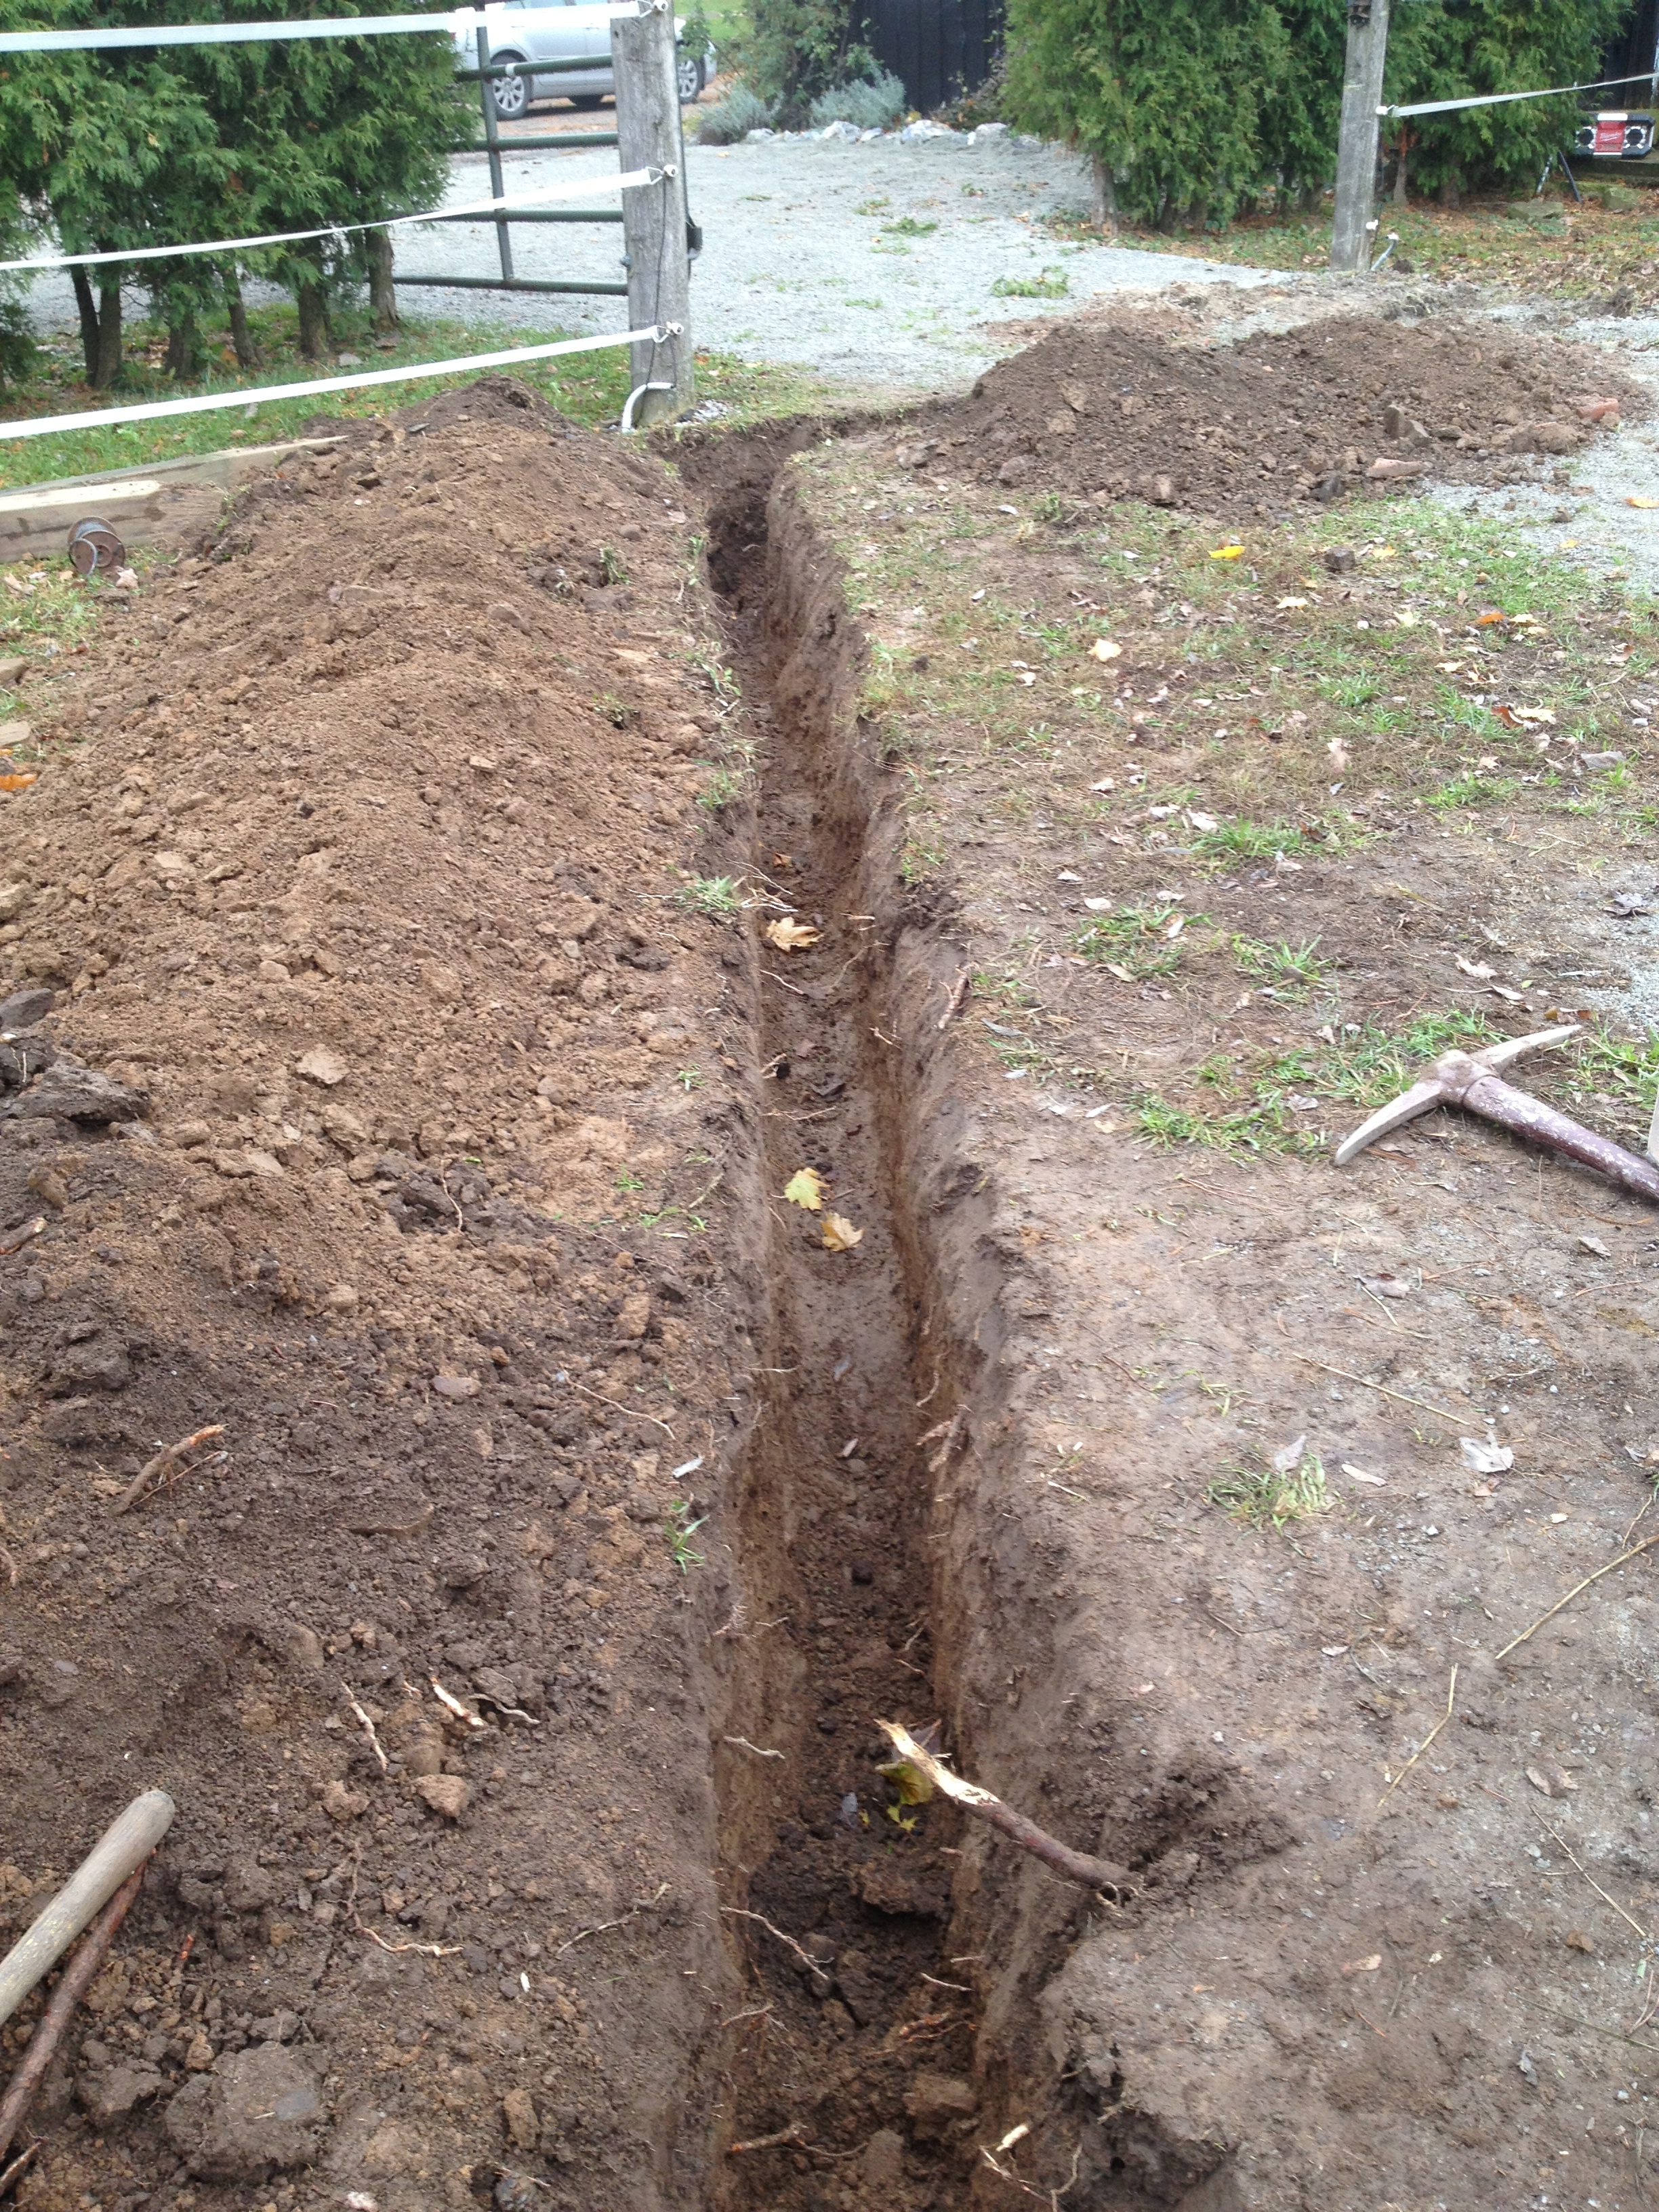 The first section of trench for electrical